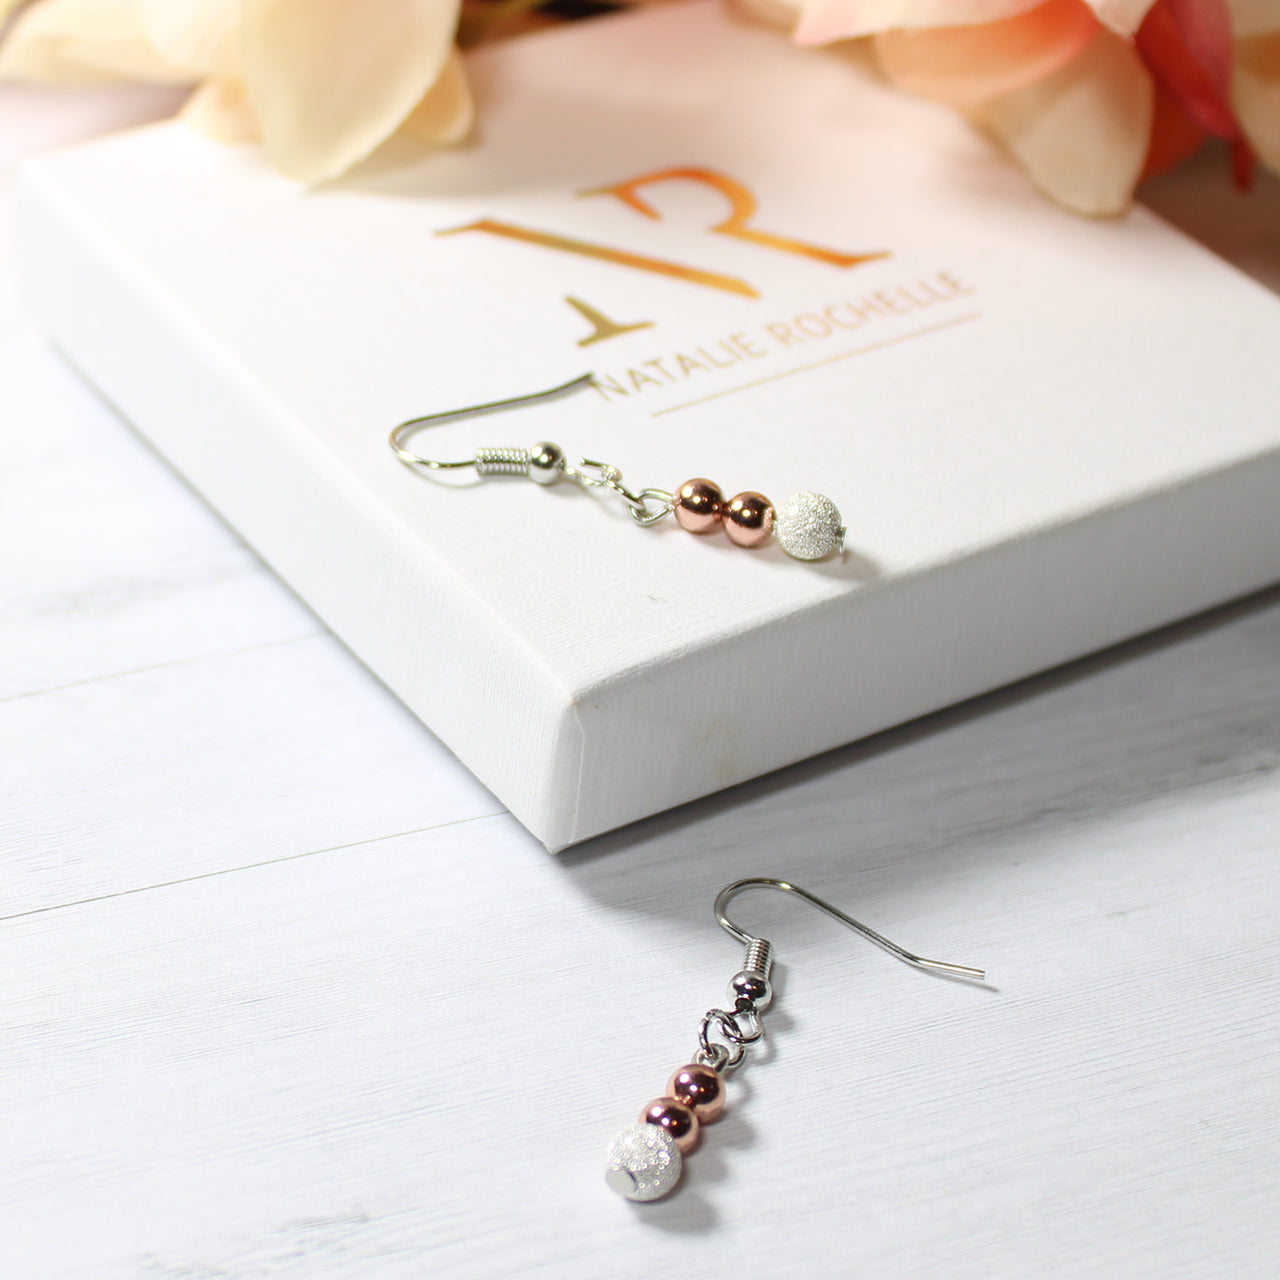 Rose Gold and Sterling Silver Sparkly Hook Earrings